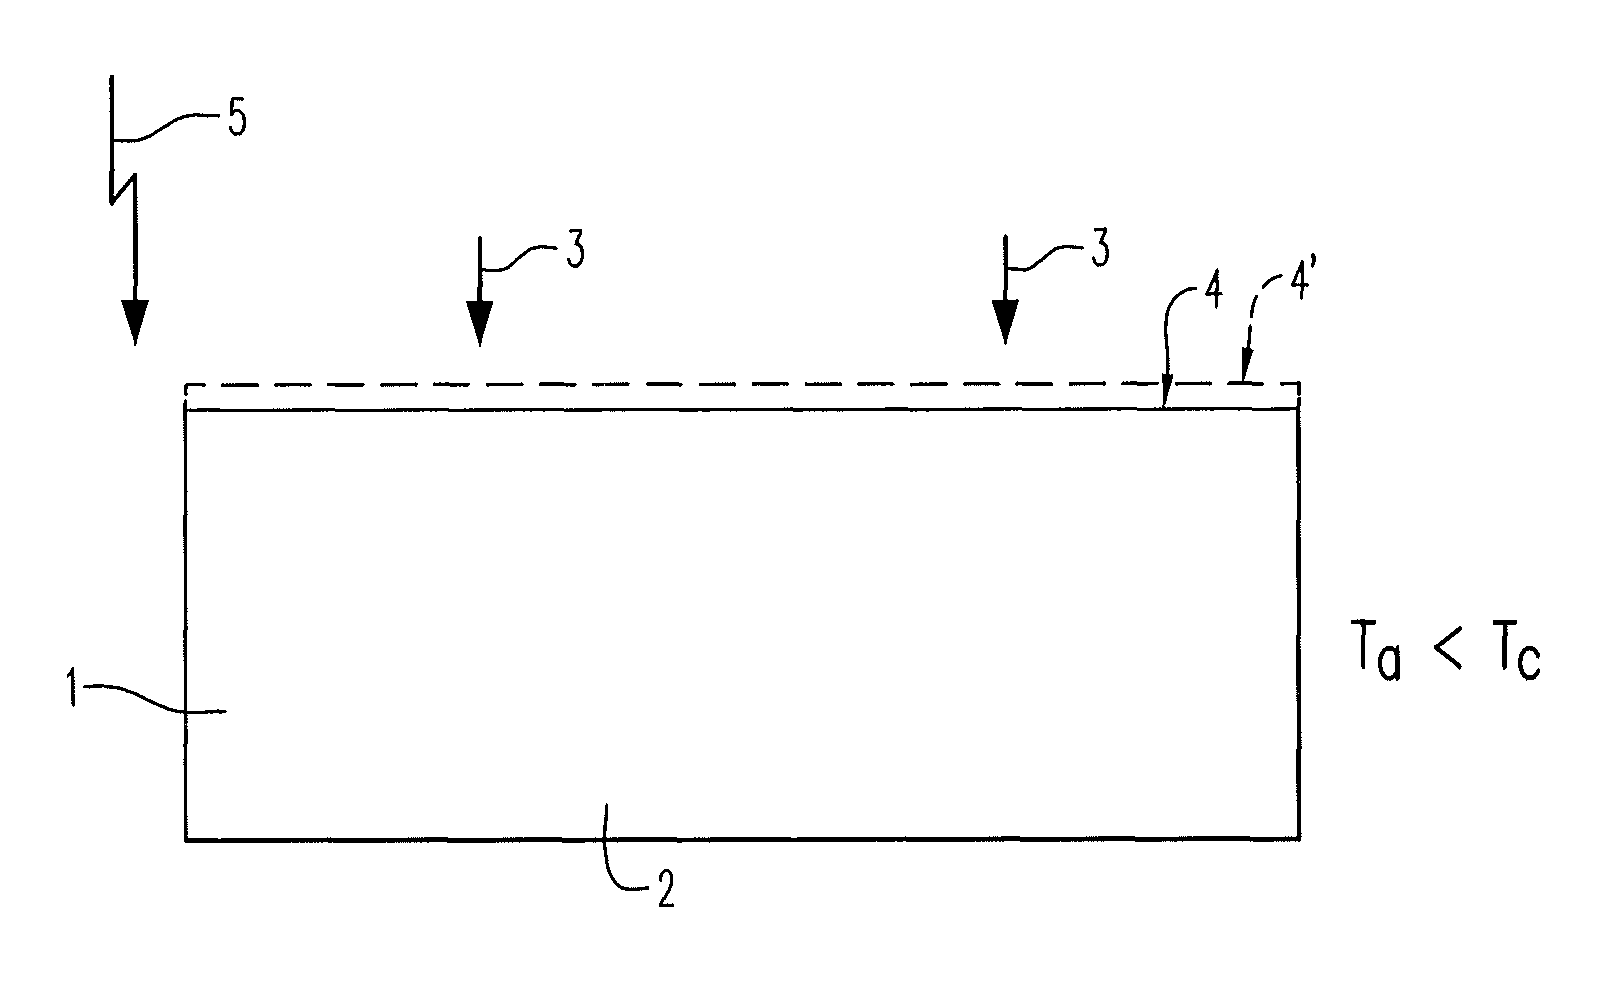 Article comprising at least one magnetocalorically active phase and method of working an article comprising at least one magnetocalorically active phase